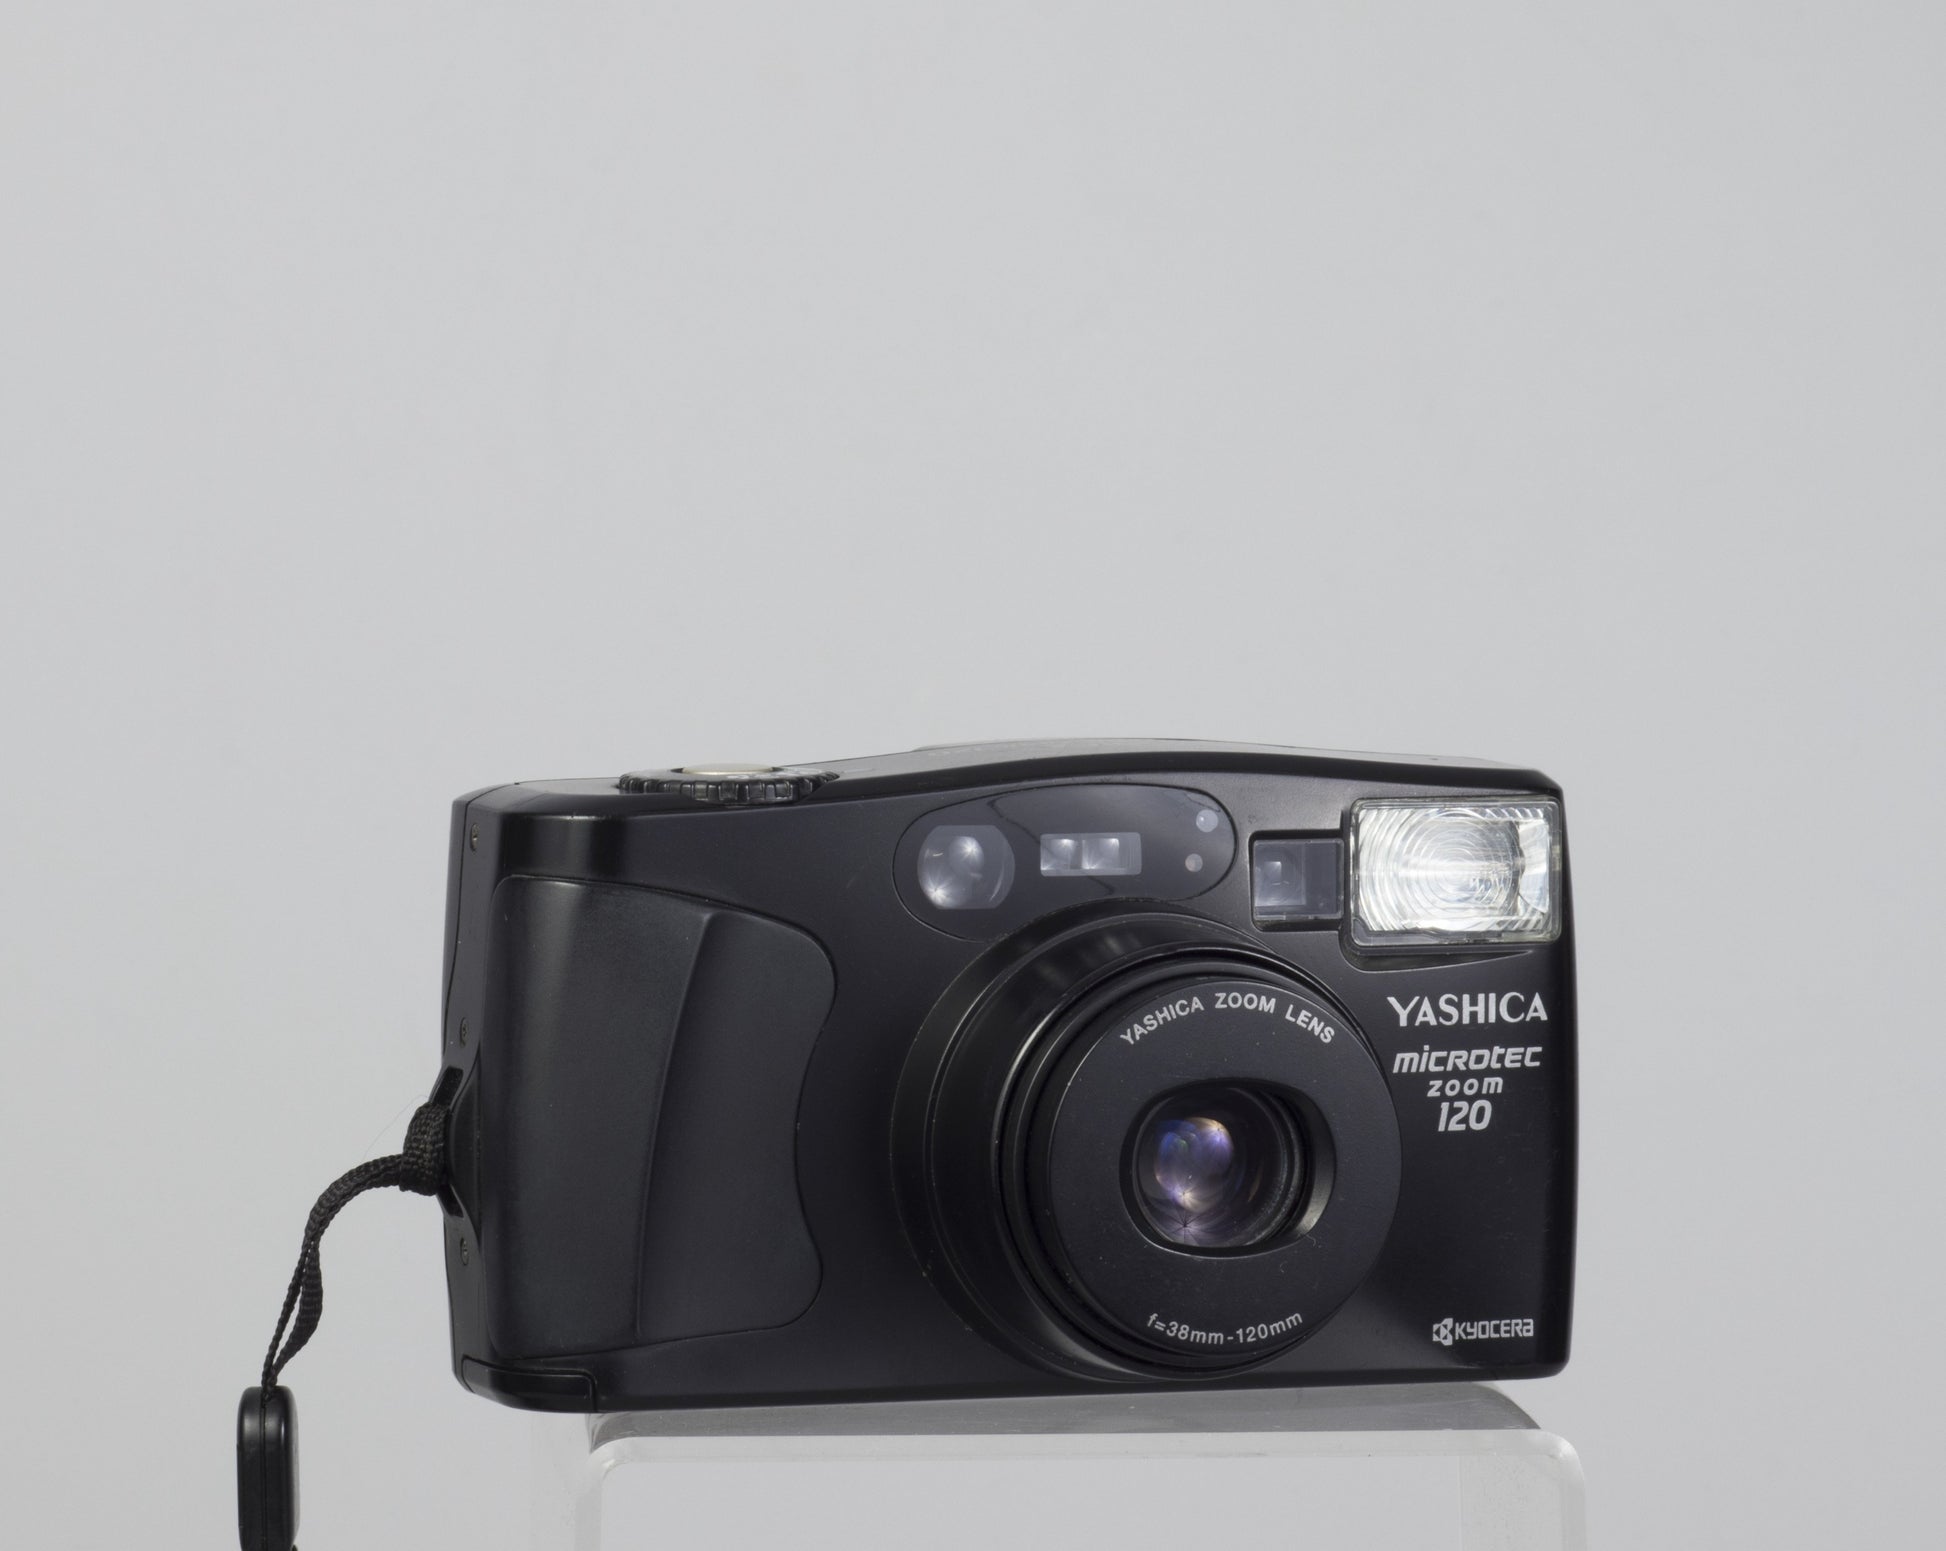 The Yashica Microtec Zoom 120 (aka Kyocera Lynx 120 or Yashica MicroElite Zoom 120) is a high quality35mm zoom point-and-shoot from circa 1995